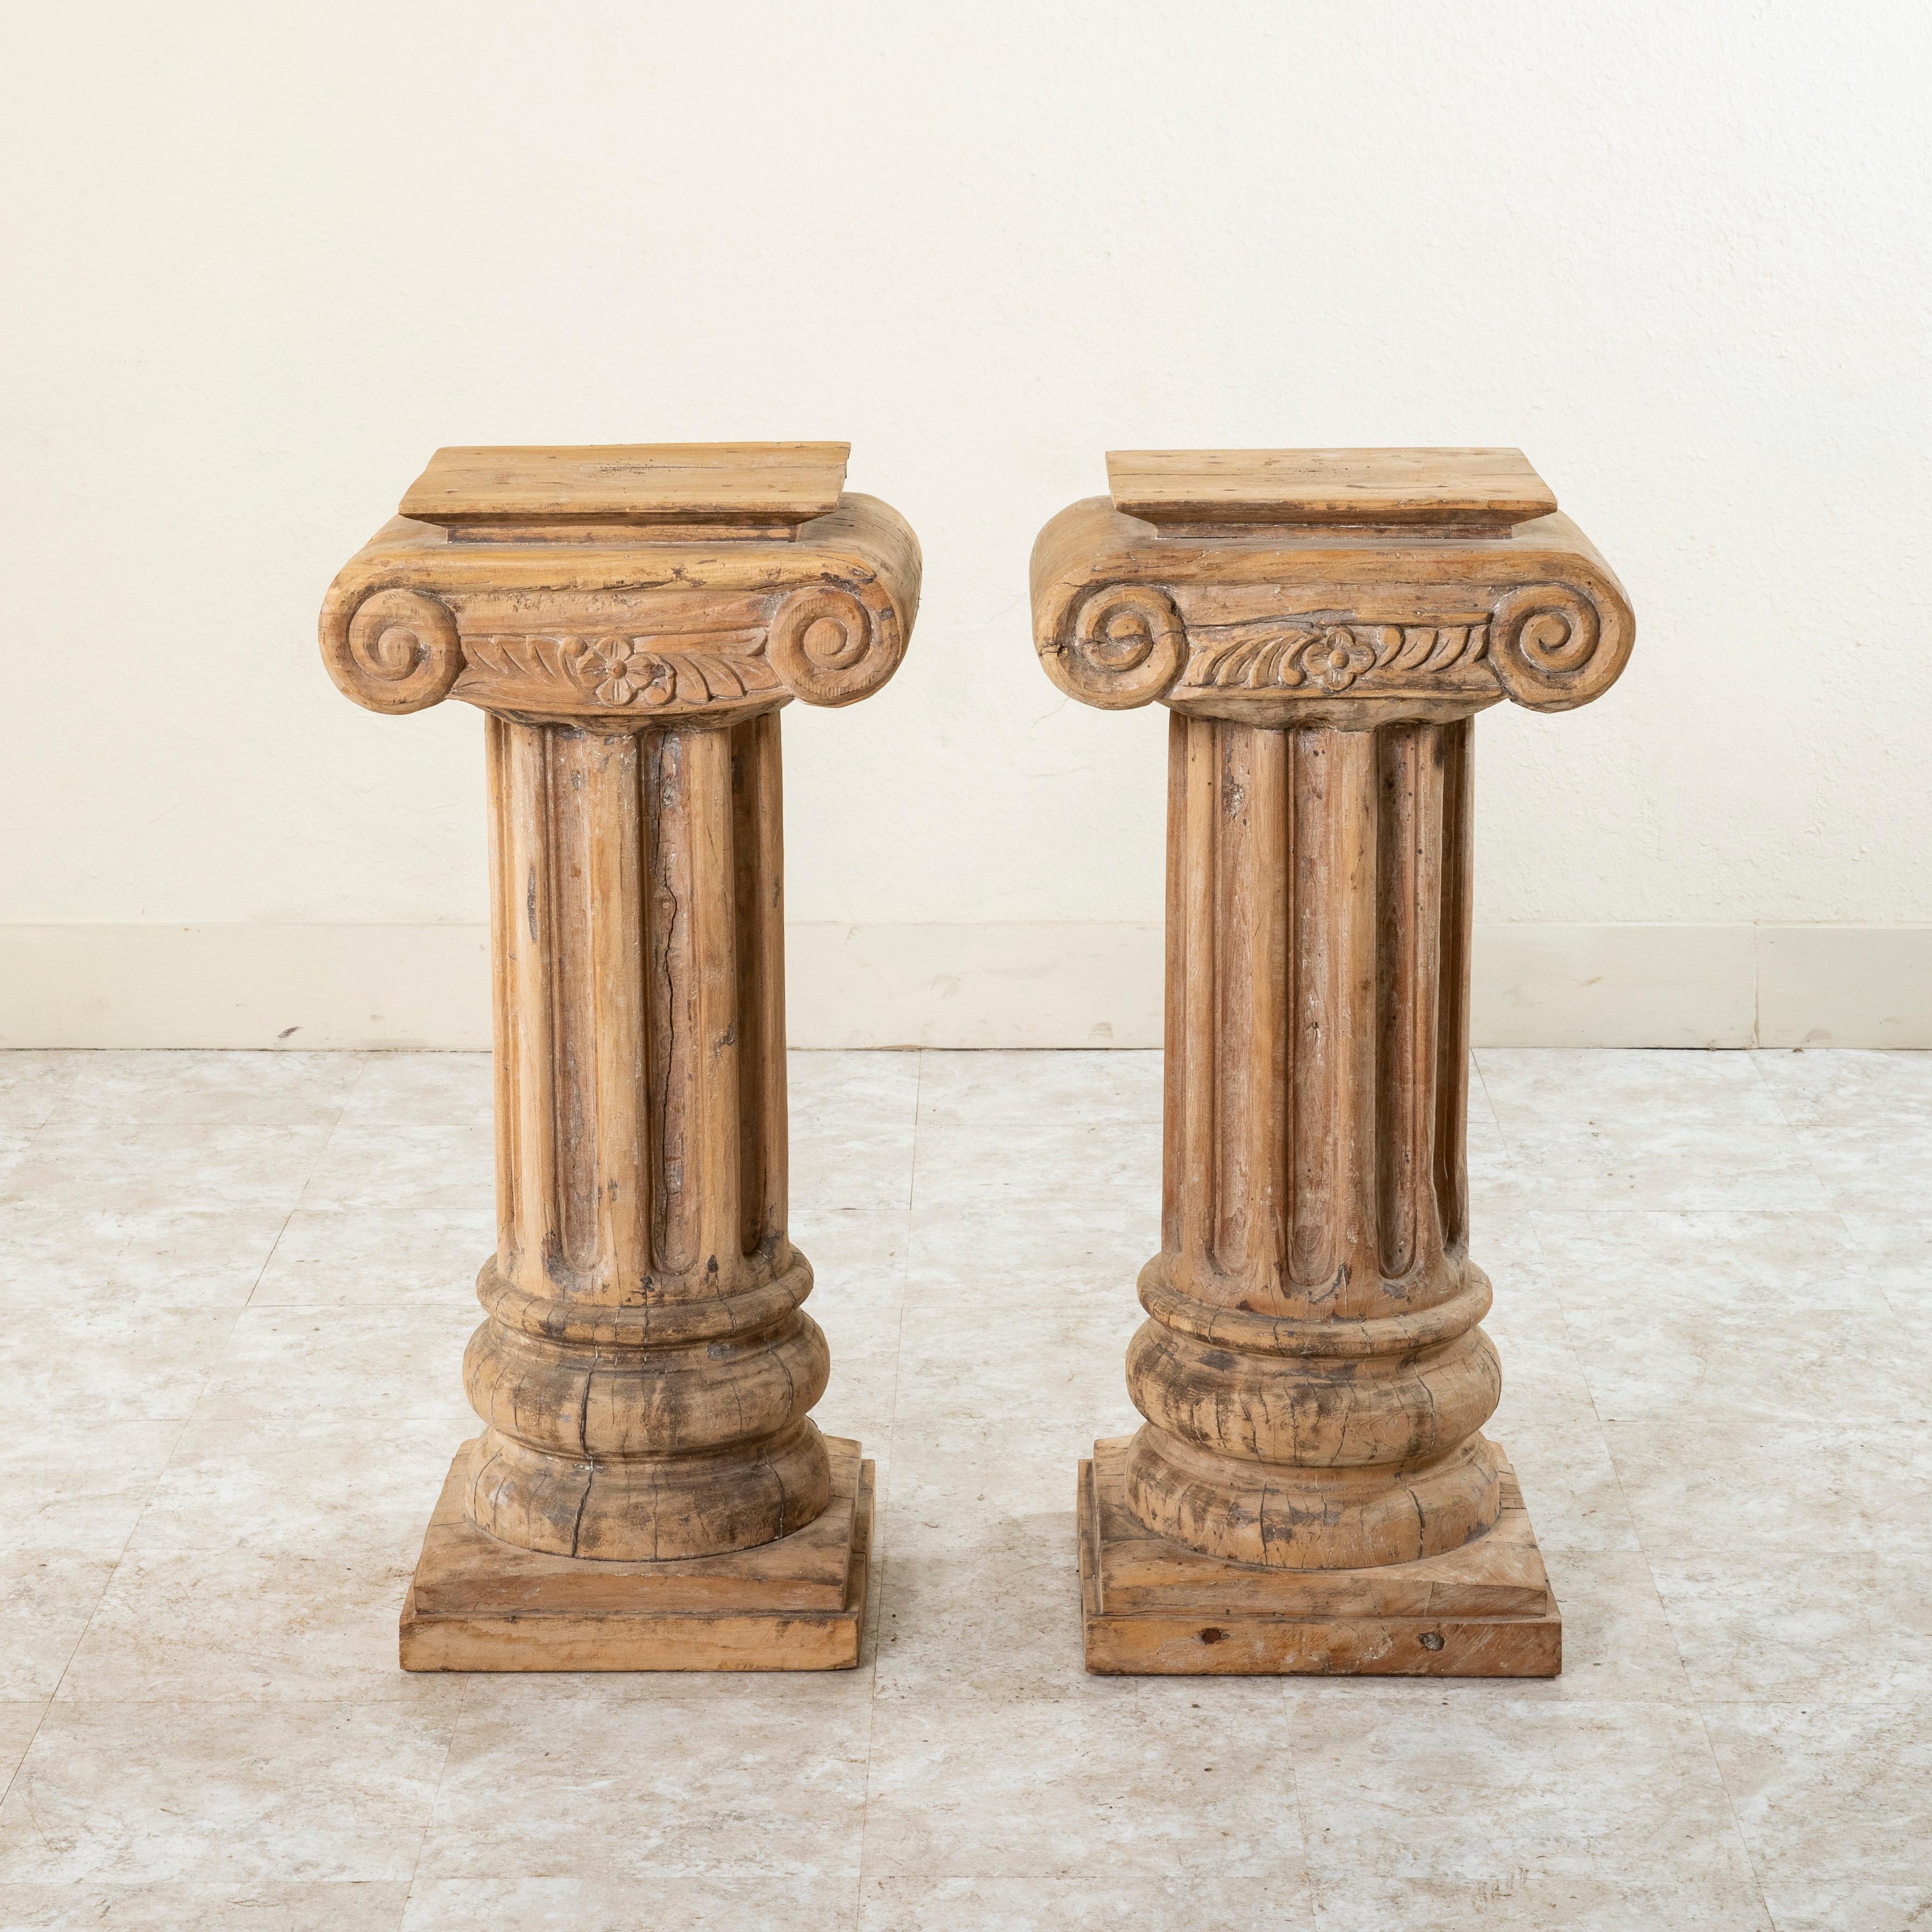 This 35-inch tall pair of large French hand carved beechwood columns or pillars from the late nineteenth century features scrolled ionic capitals detailed with a carved central flower flanked by stylized leaves. Their central fluted pillars rest on